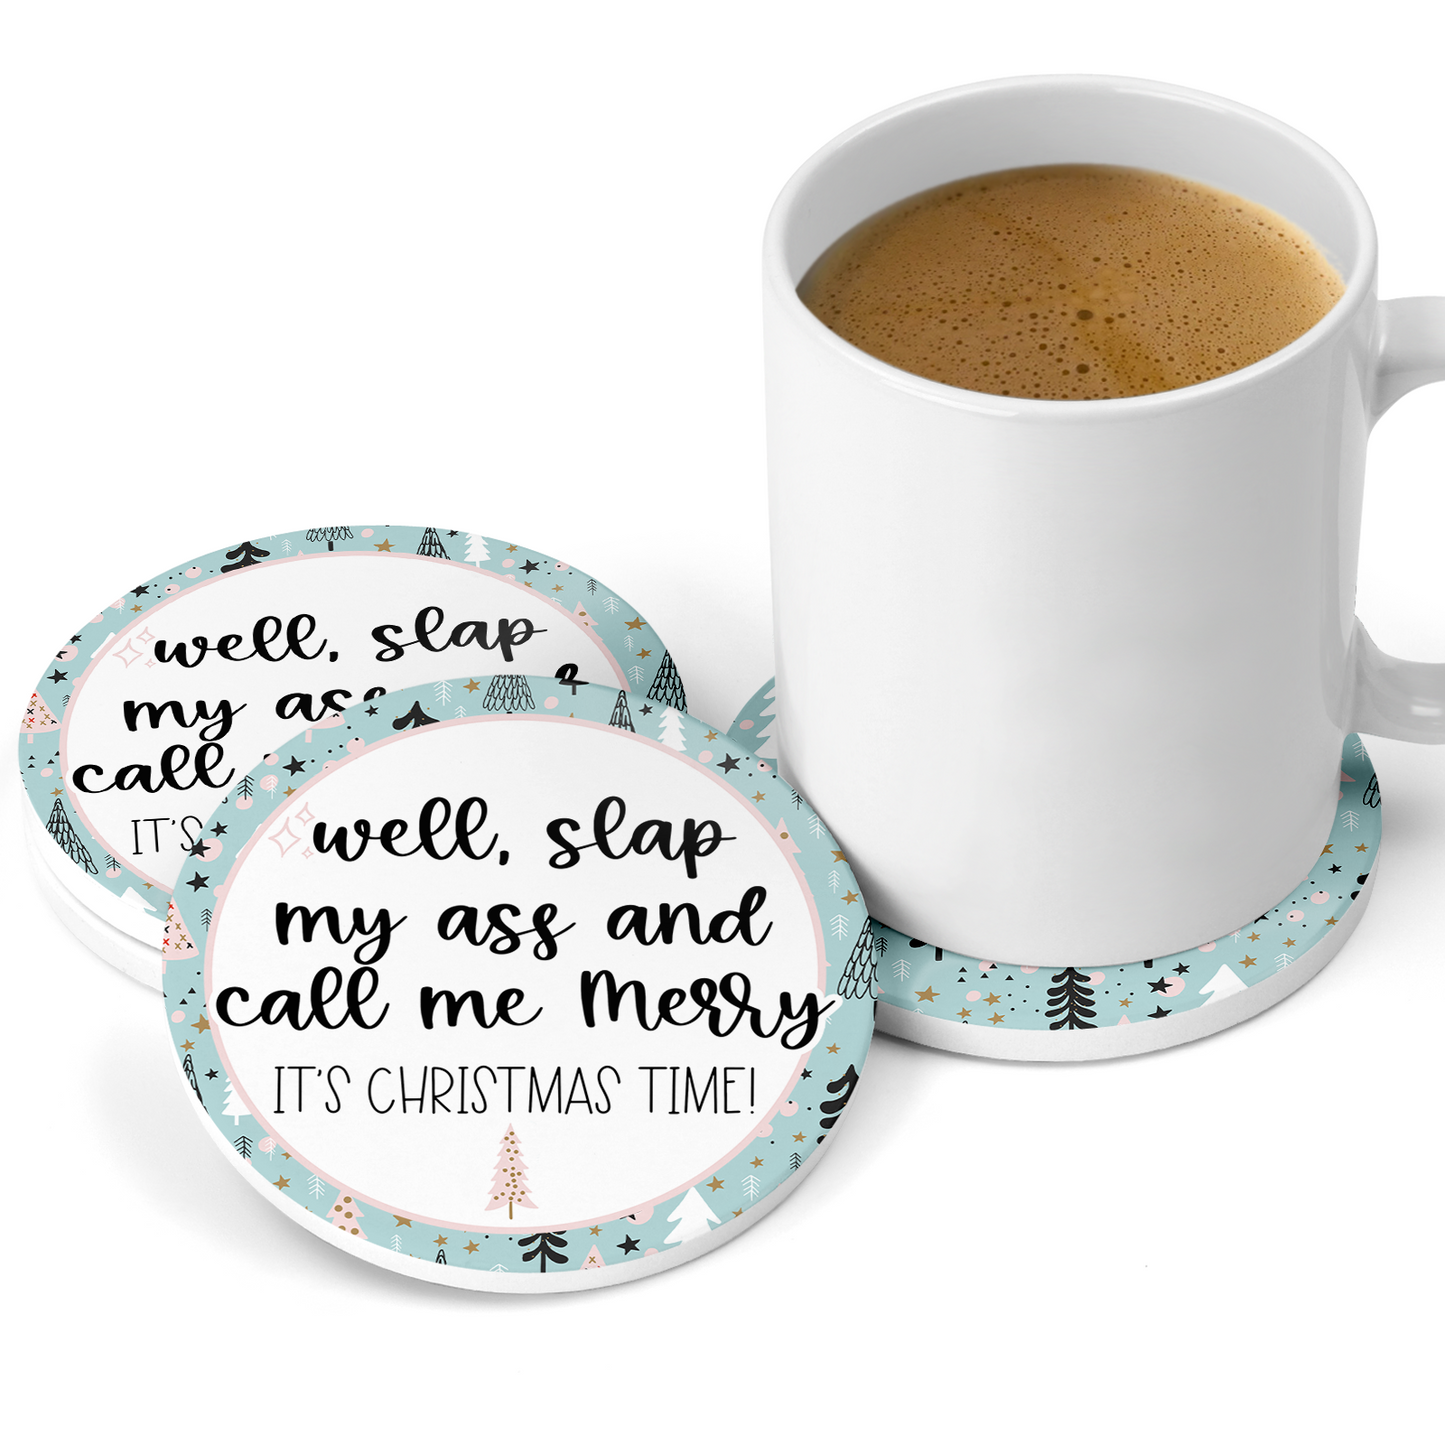 Well Slap My Ass and Call Me Merry It's Christmas Time Sandstone Coaster Set